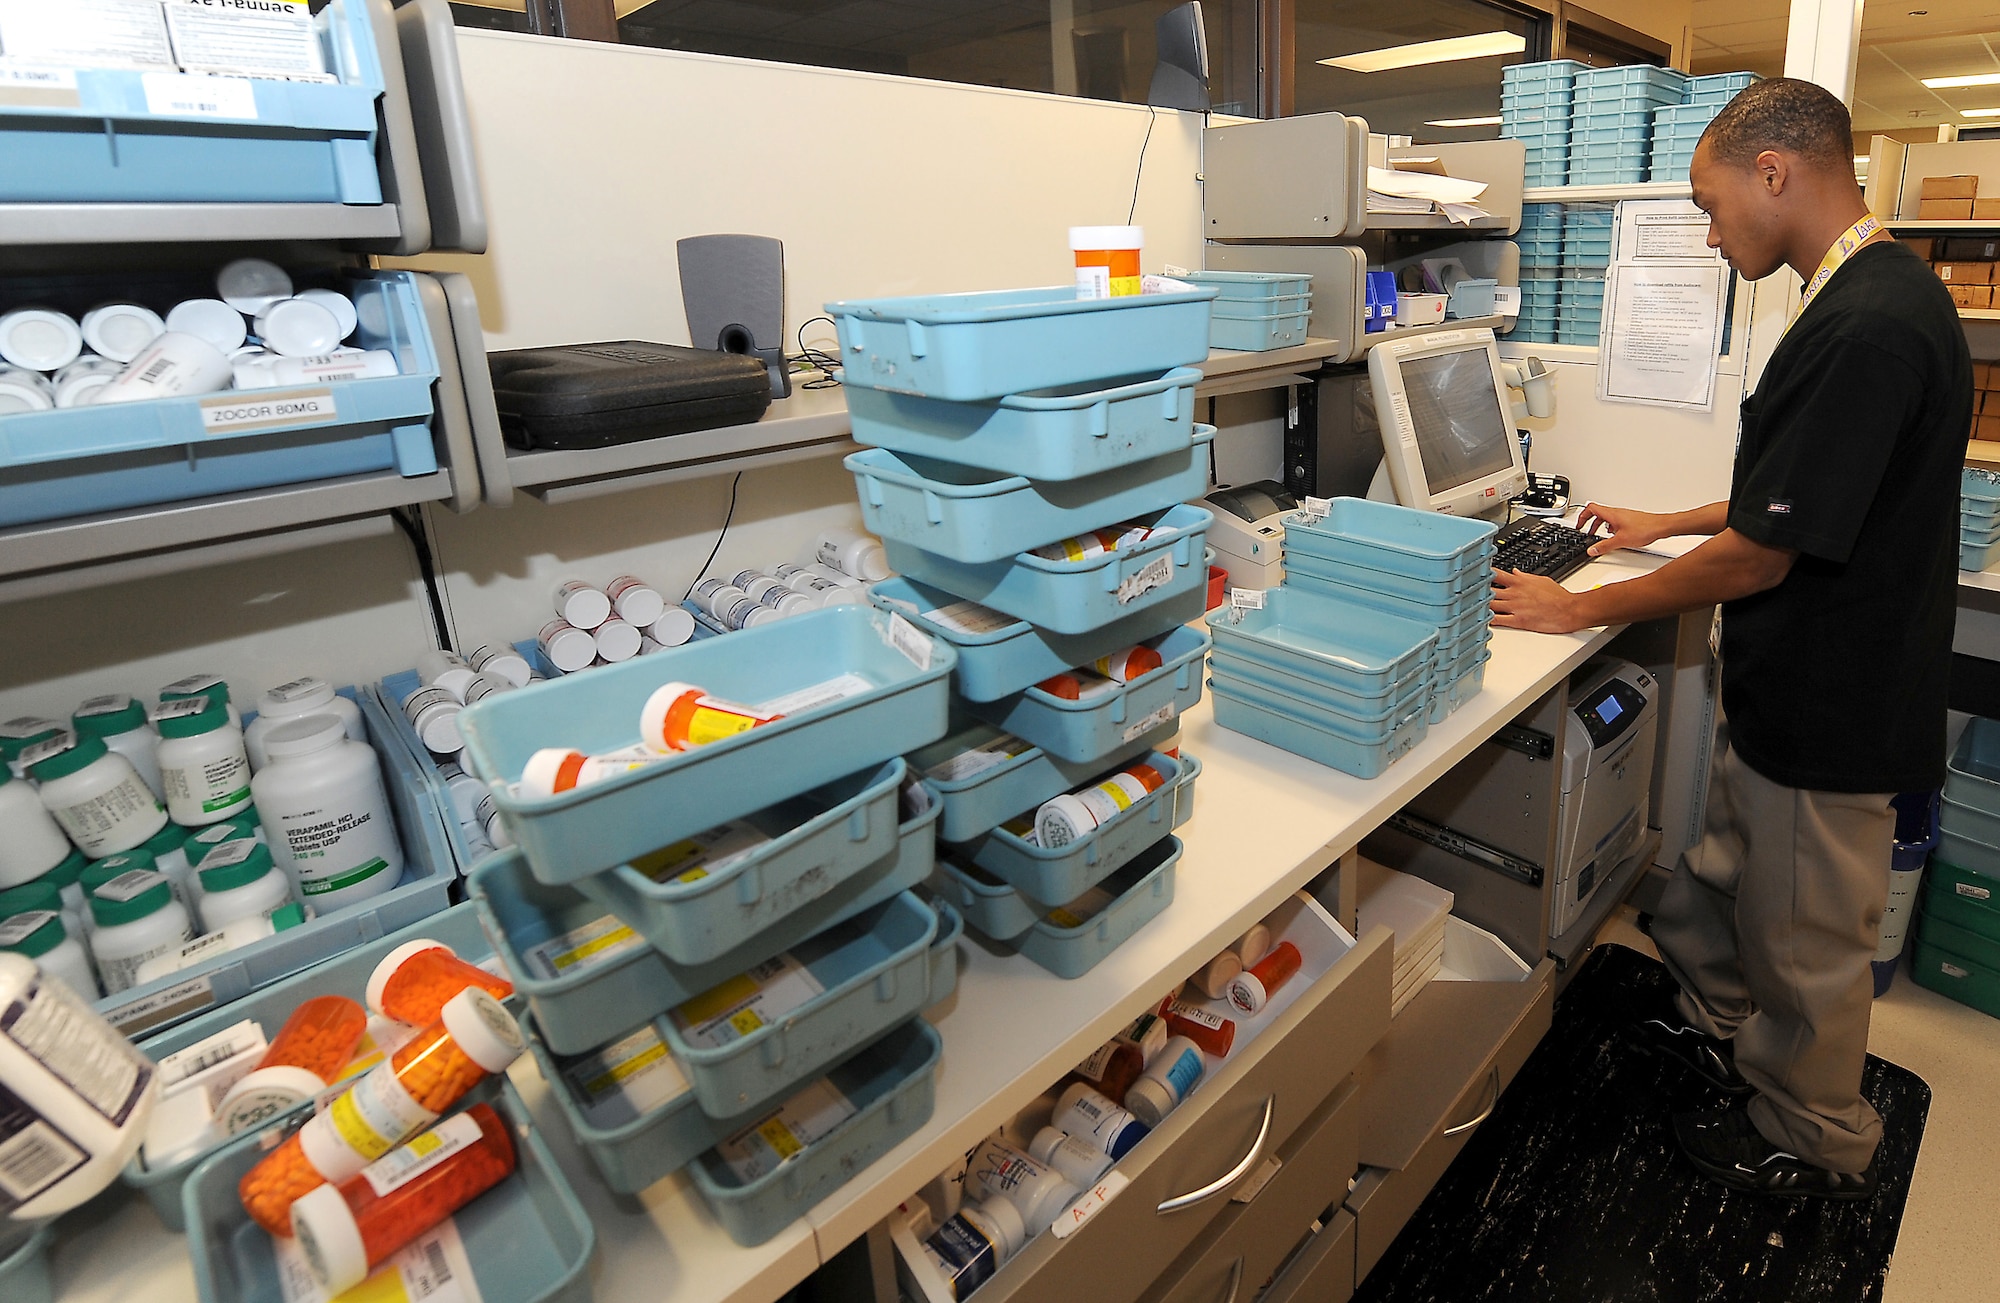 Mario Blount, pharmacy technician, verifies prescription labels Oct. 14 at the David Grant USAF Medical center pharmacy. The medical center processes an average of 2,215 filled and 1,149 refilled prescriptions daily. (U.S. Air Force photo/ Staff Sgt. Liliana Moreno)